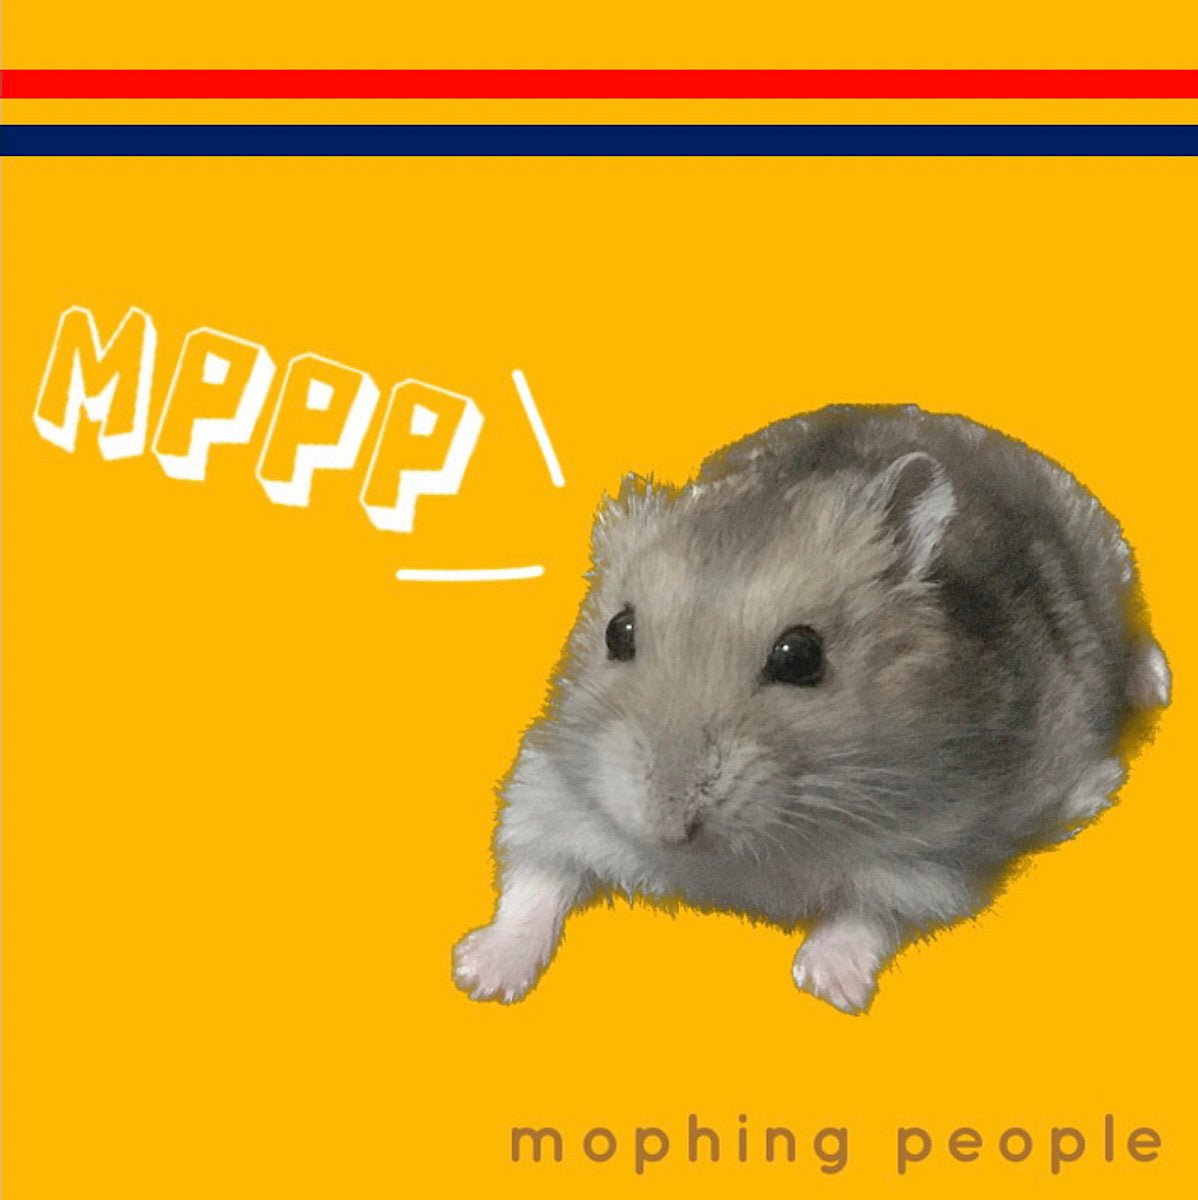 Mophing People - MPPP (Tape)